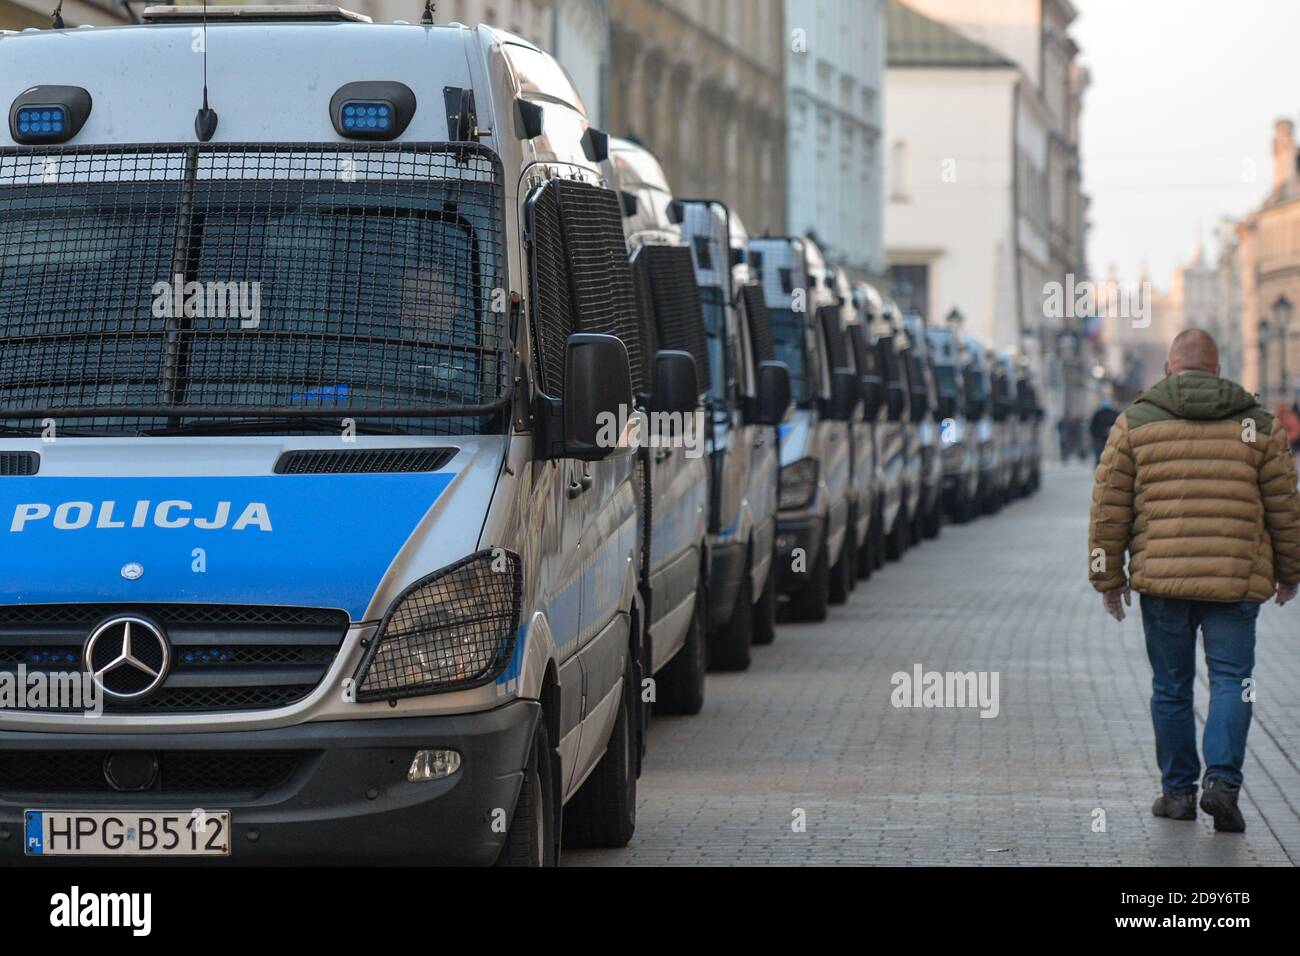 Krakow, Poland. 7 November, 2020.  A line of Police vans seen during a Pro-Choice protest in Krakow's Old Town. Pro-Choice and women's rights activists and their supporters organised on Saturday evening another anti-government protest in Krakow to express their anger at the Supreme Court ruling in relation to abortion laws.. Credit: ASWphoto/Alamy Live News Stock Photo